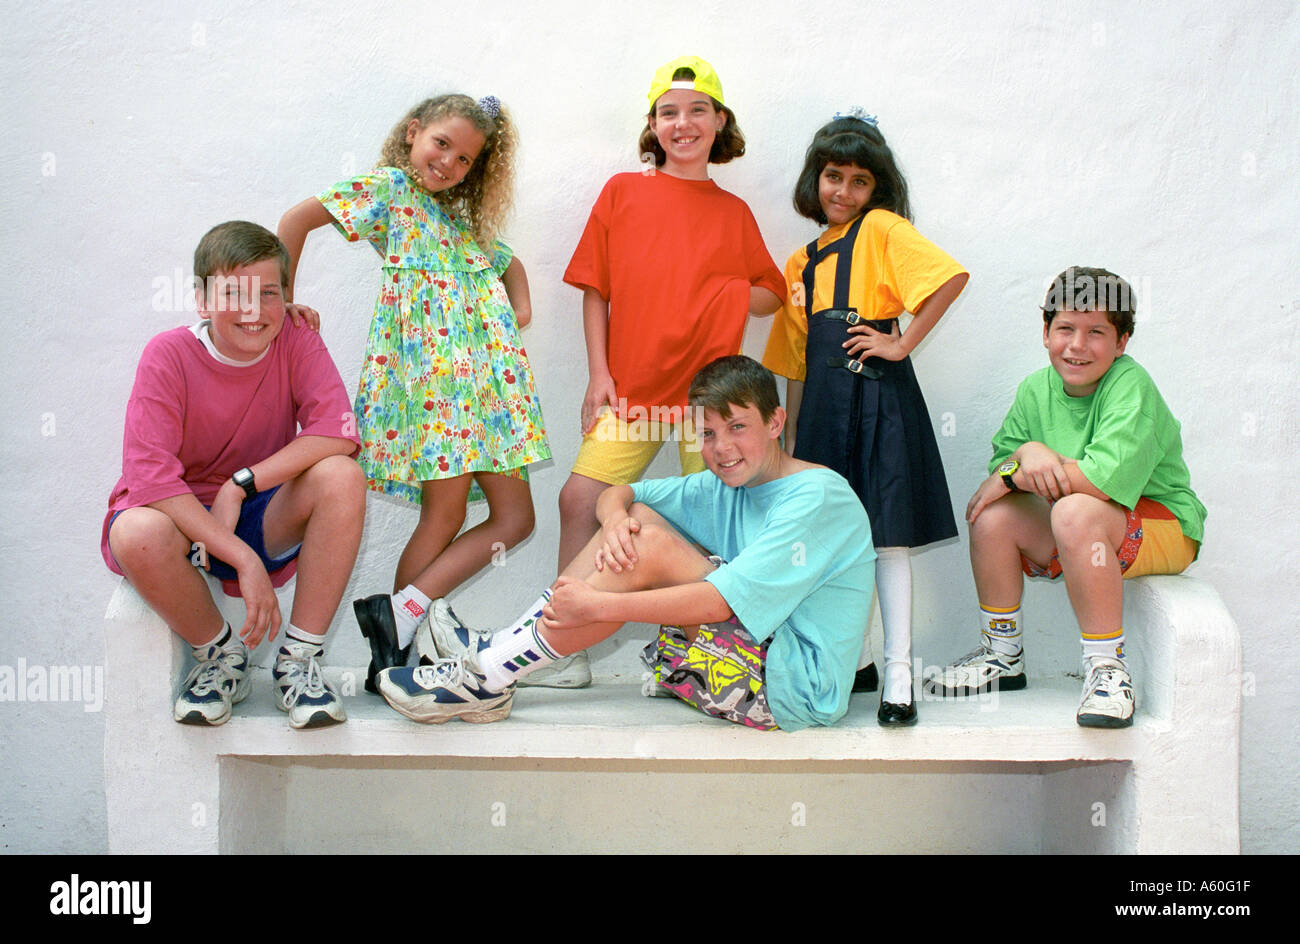 Group of young junior boys and girls 6 to 10 years pose for the camera in a selection of colourful clothing styles Stock Photo